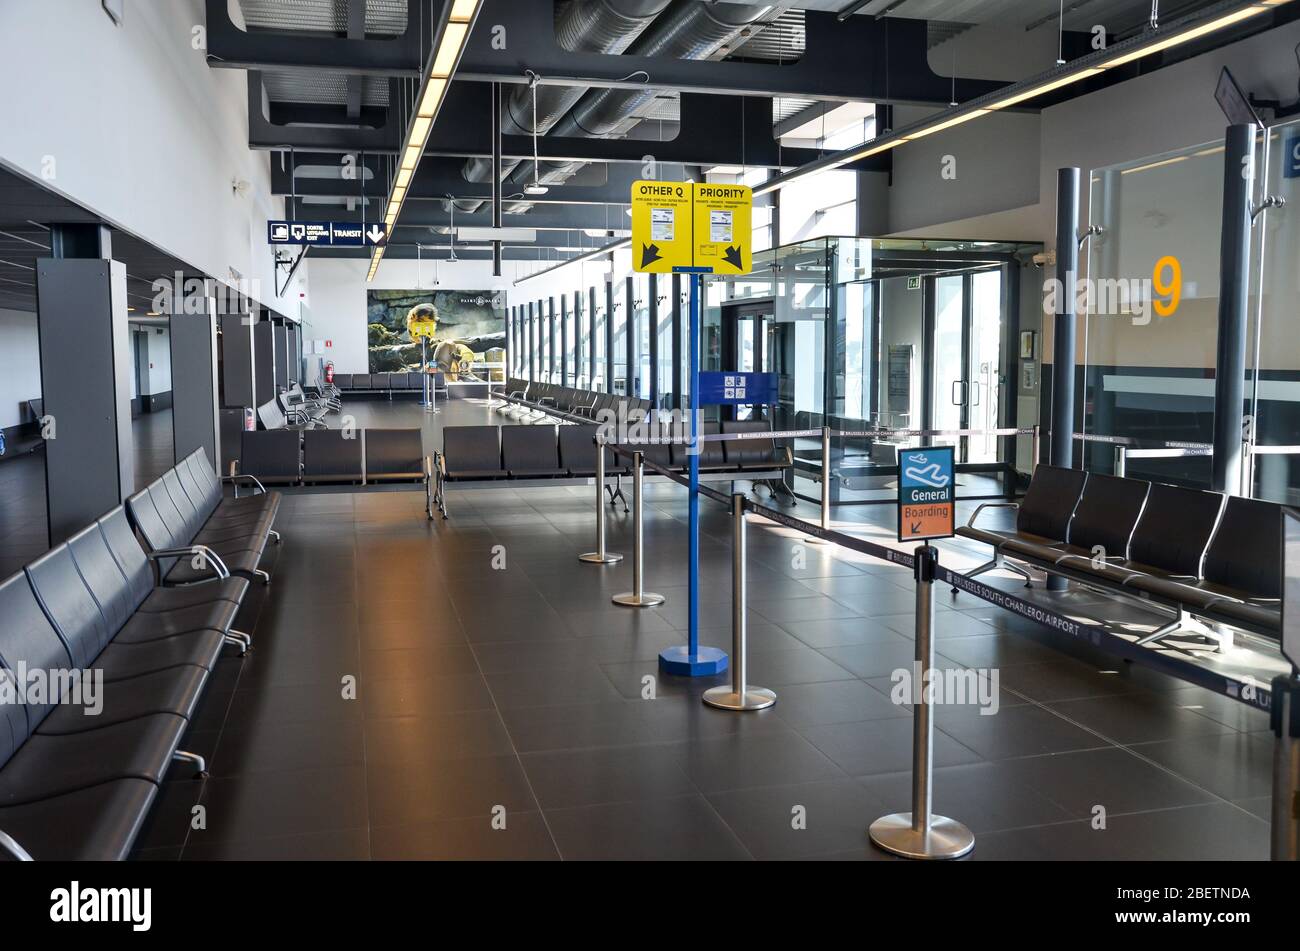 Charleroi, Brussels, Belgium - March 17, 2020: Empty airport terminal in the Belgian airport. Gate with no people. Travel restriction due to coronavirus pandemic. COVID-19 shutdown. Cancelled flights. Stock Photo